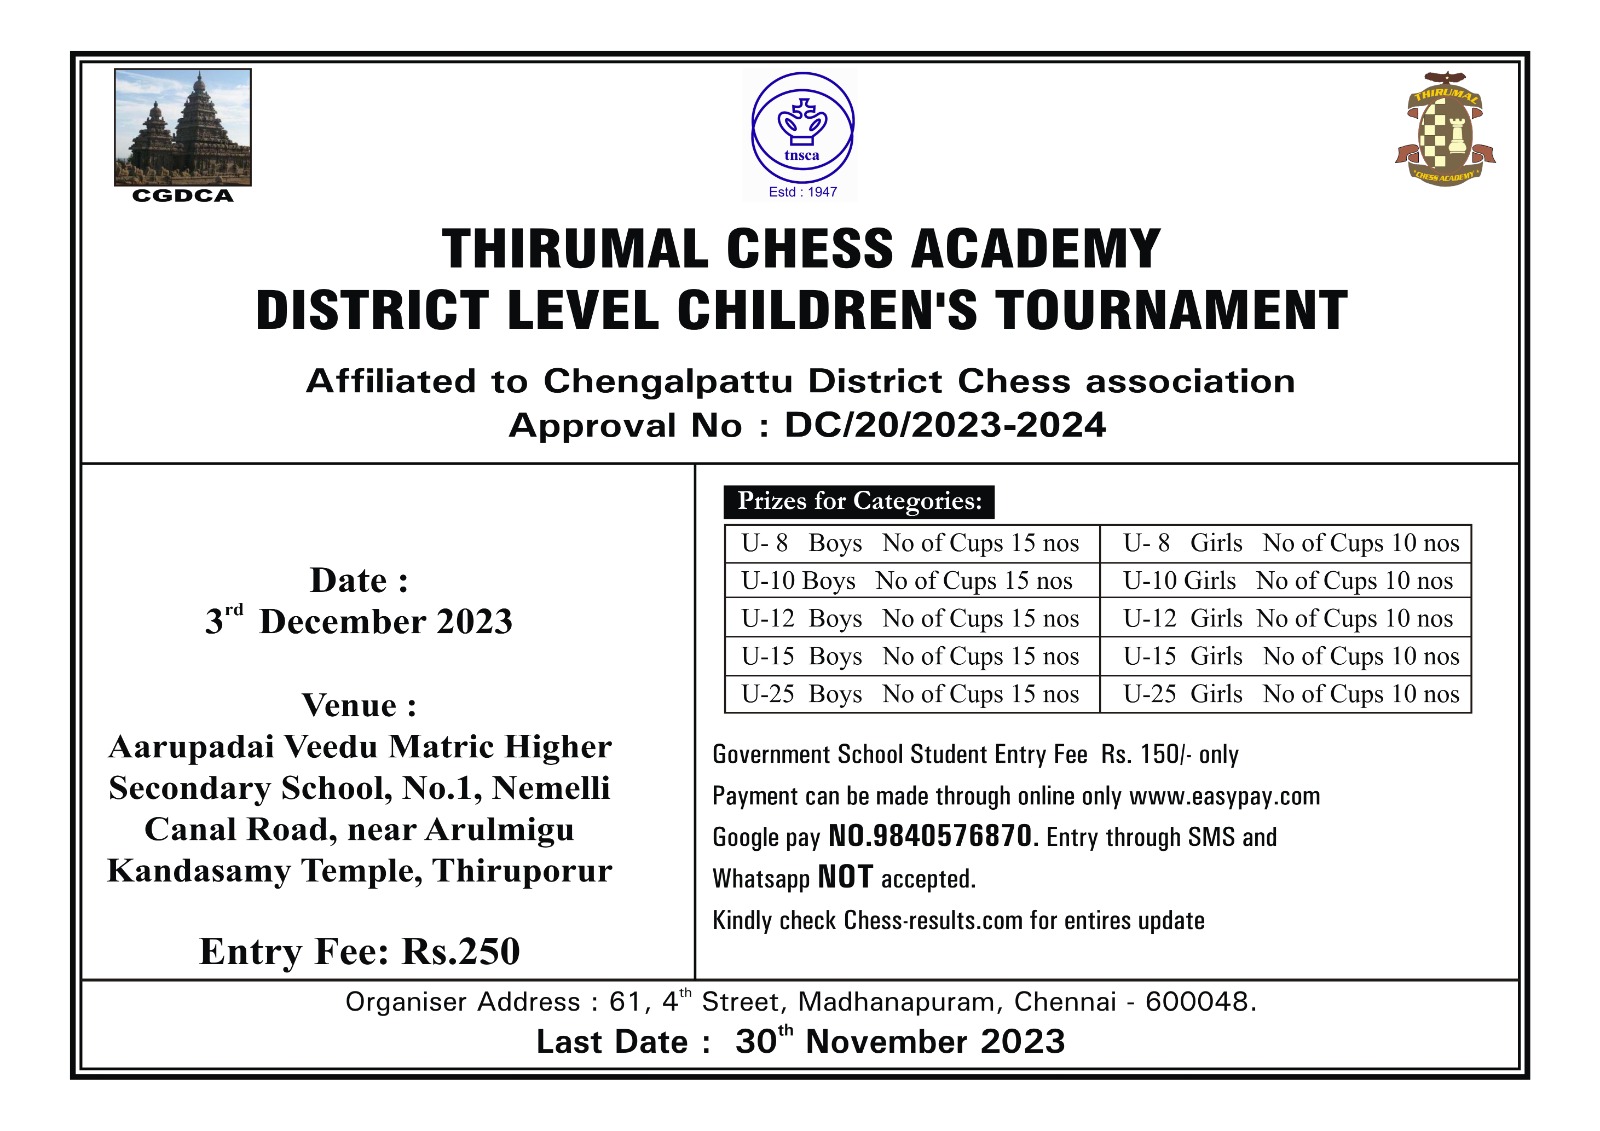 HYDERABAD ALL INDIA BELOW 1600 FIDE RATING CHESS TOURNAMENT - 2022 -  Telangana State Chess Association L